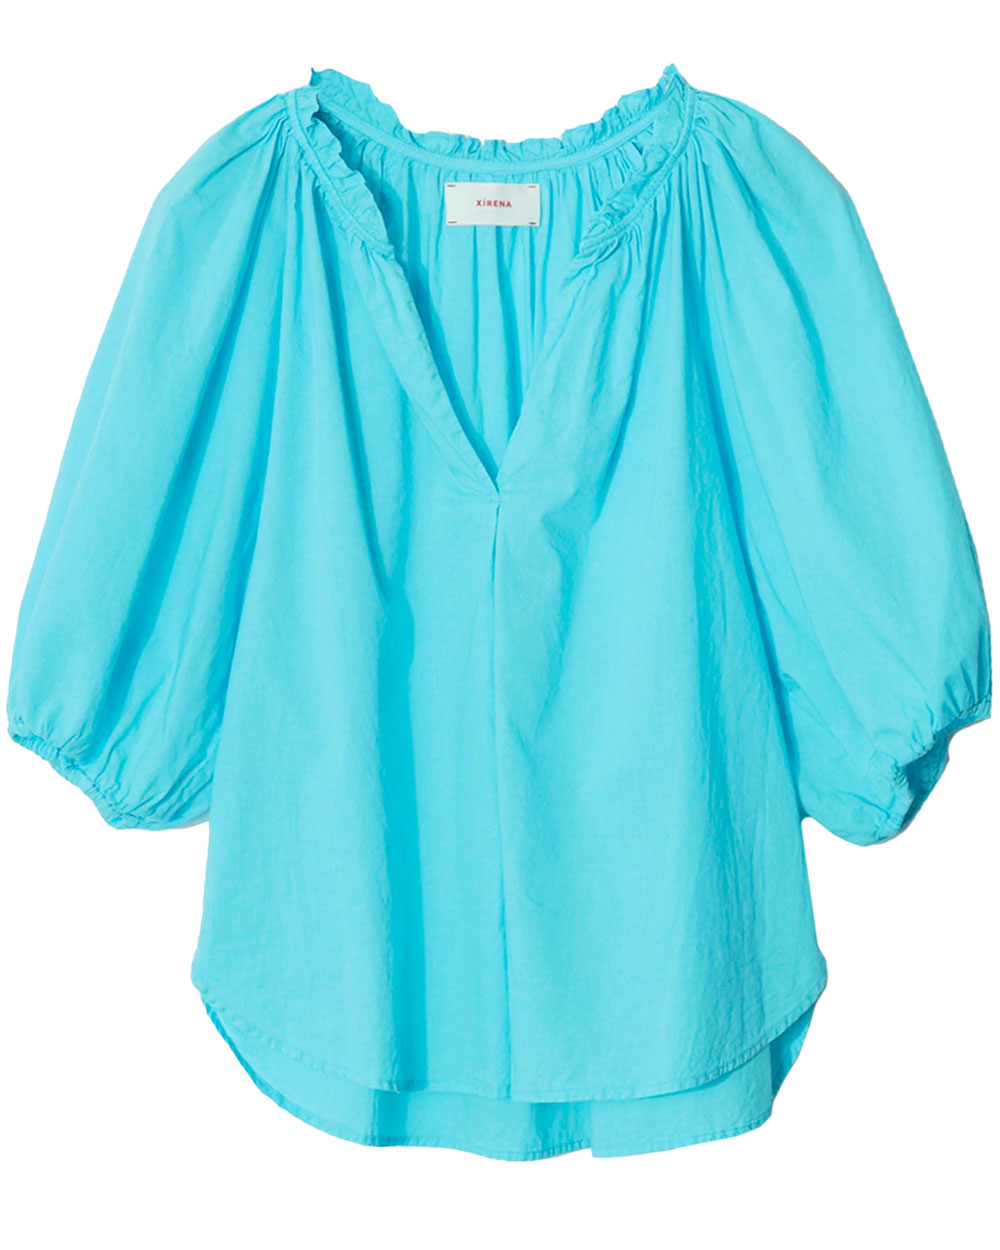 Turquoise Jules Top